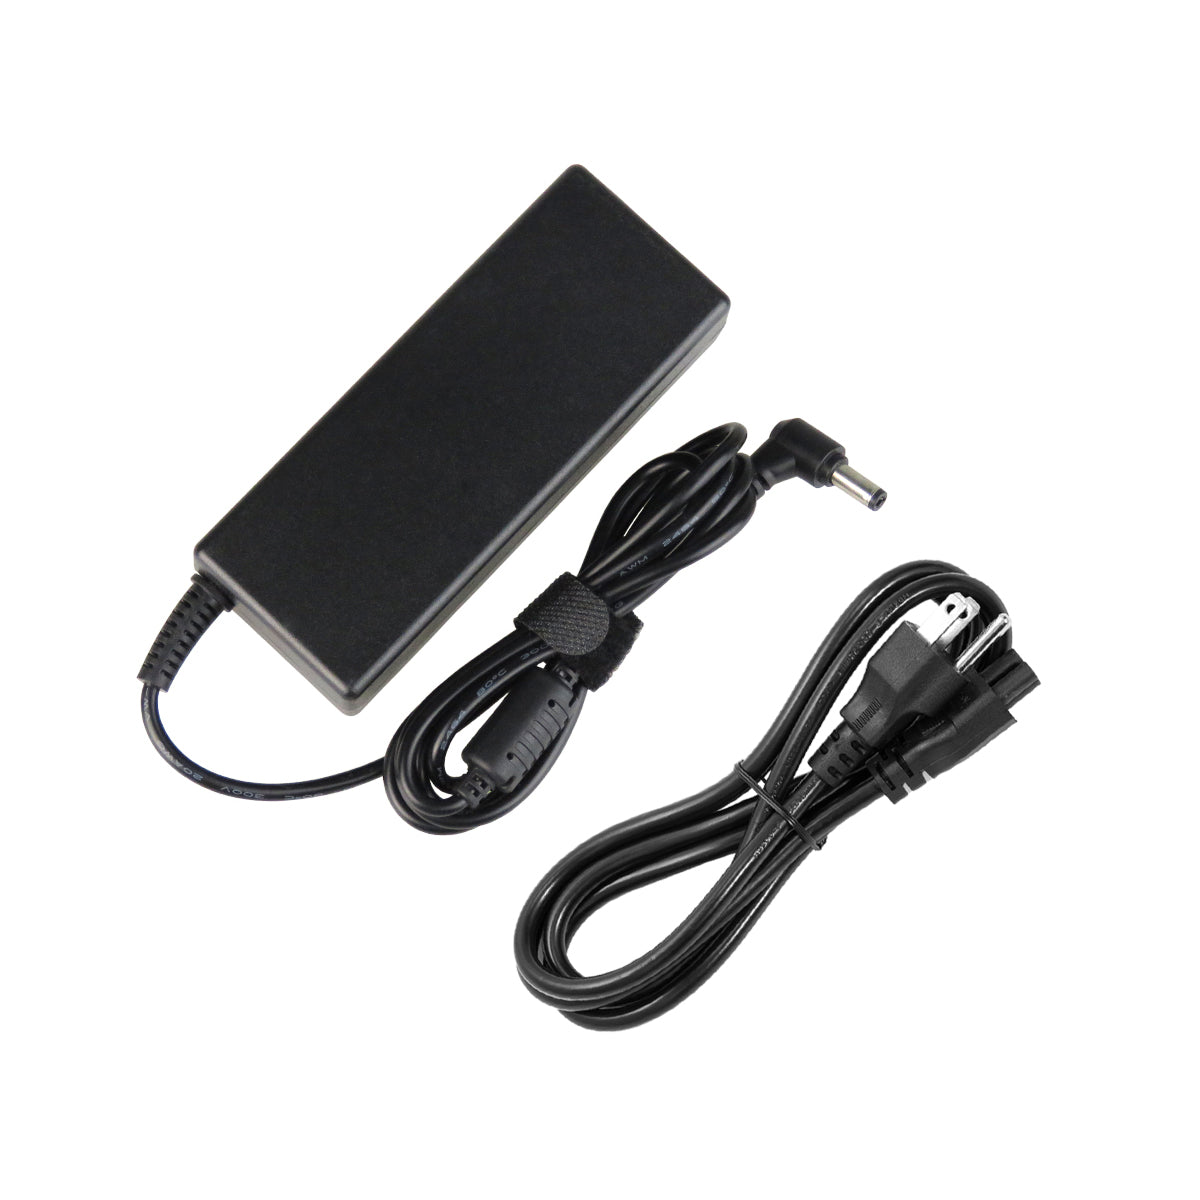 AC Adapter Charger for ASUS X54L-SX121V Notebook.